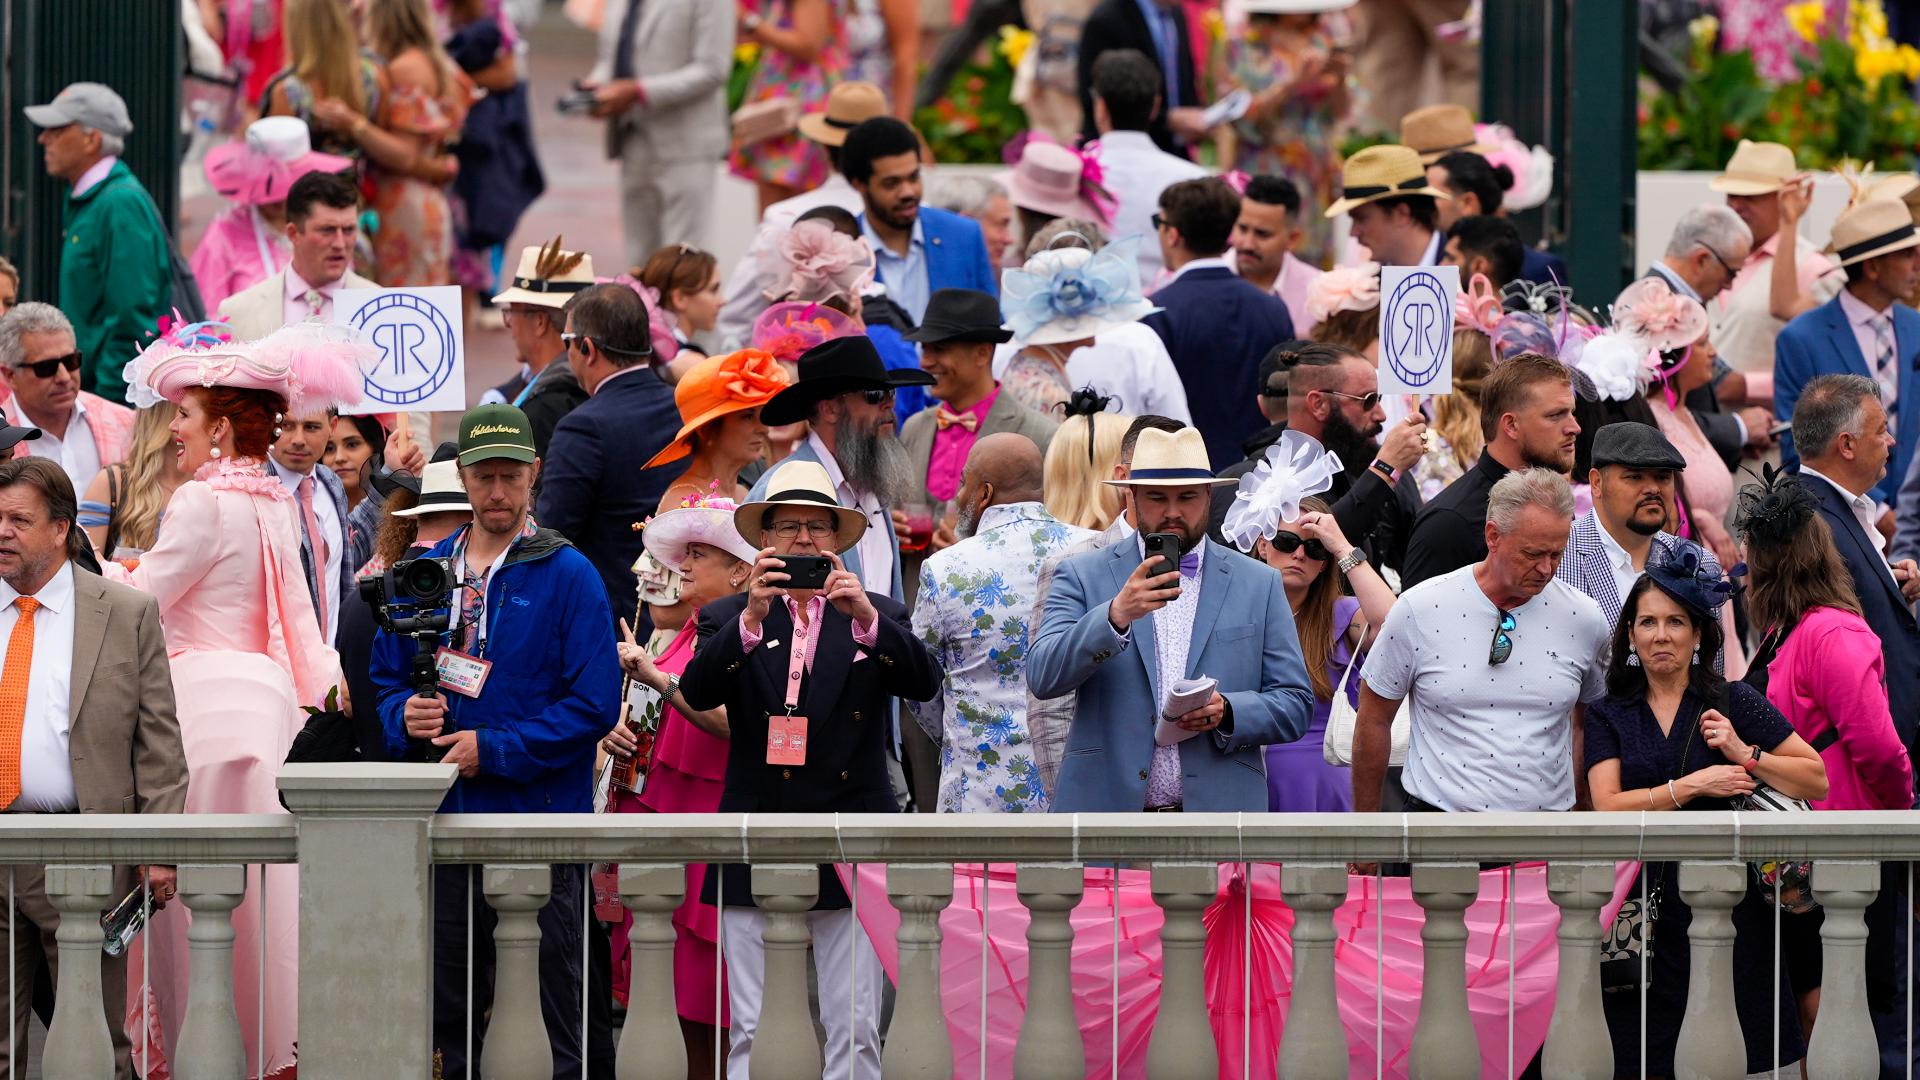 The sea of pink of more than 100,000 was spread throughout Churchill Downs and guests traveled far to see the 150th Kentucky Oaks.